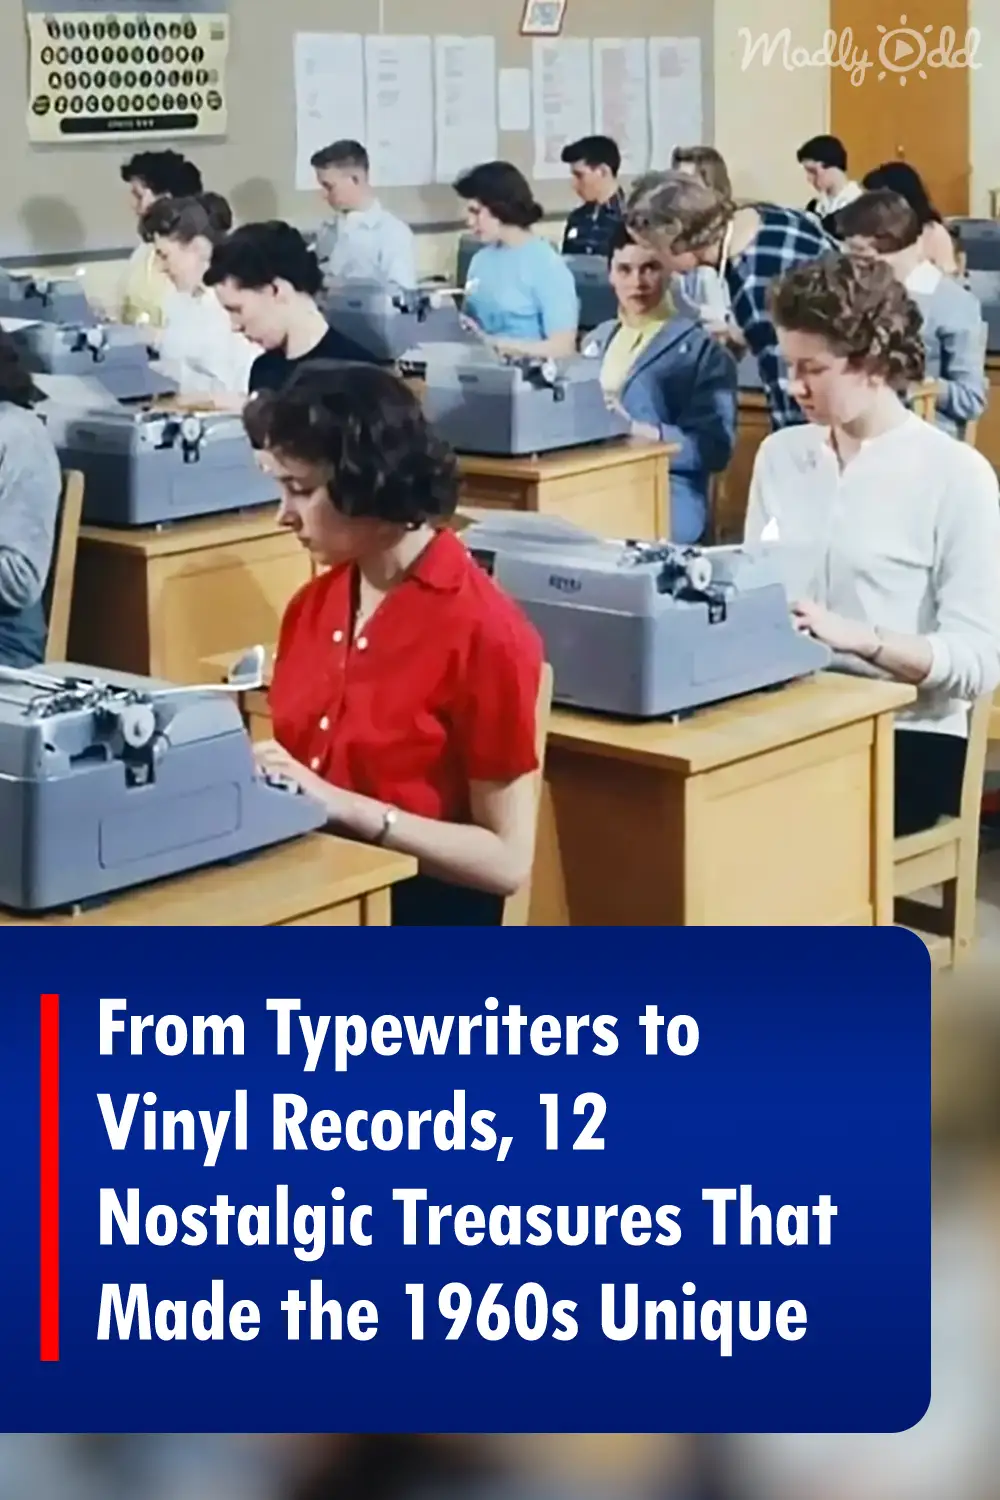 From Typewriters to Vinyl Records, 12 Nostalgic Treasures That Made the 1960s Unique